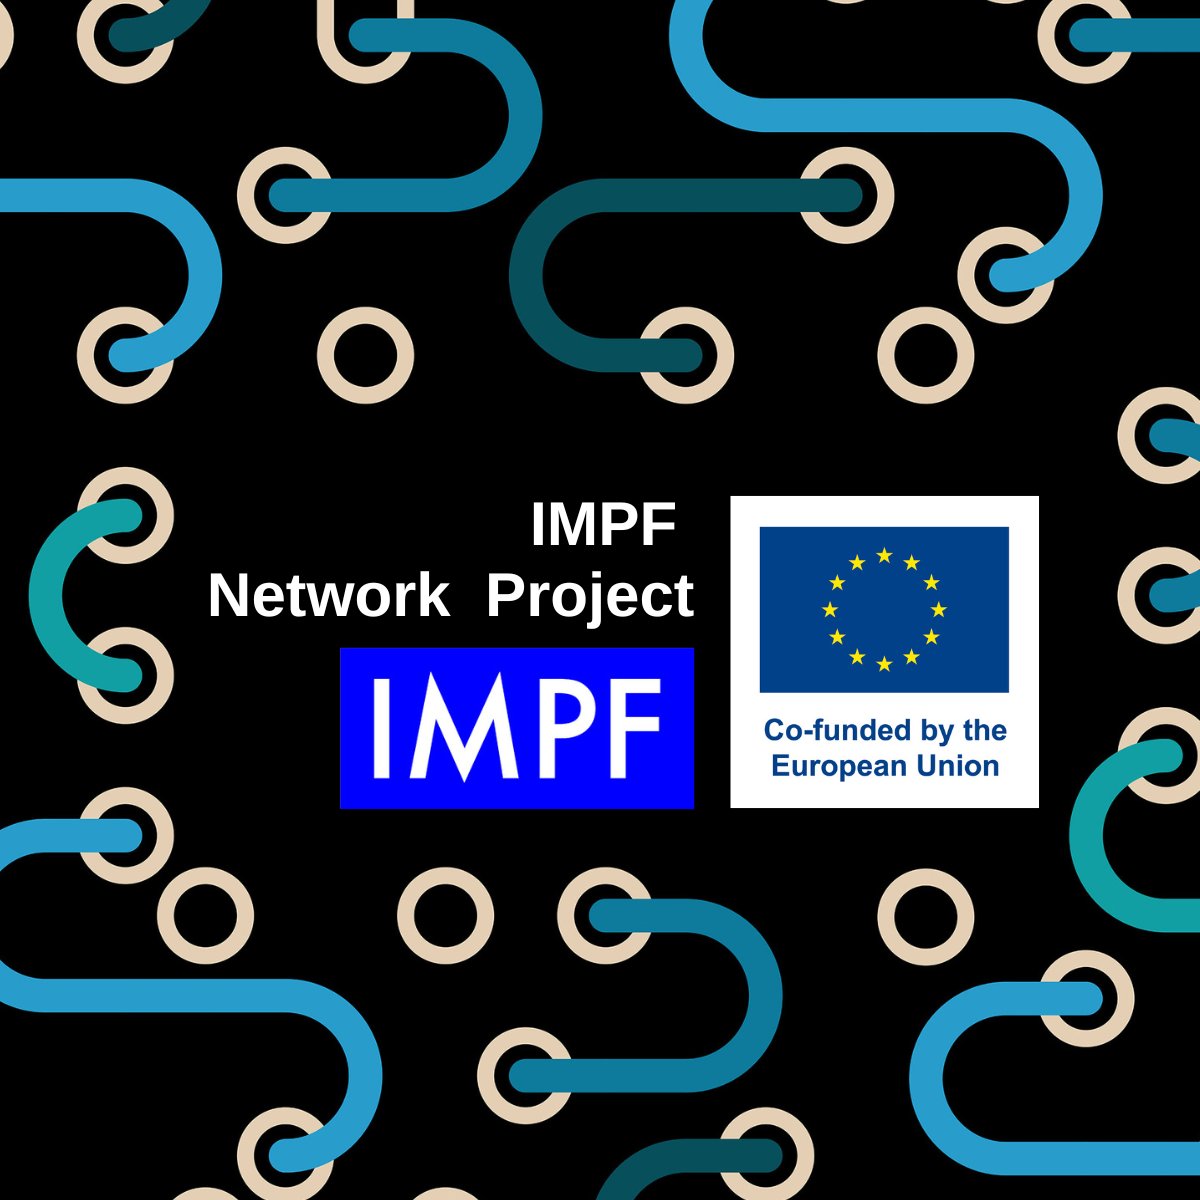 With the support of @europe_creative - @IMPForum  IMPF Network Project aims to build the capacity of #indie #music #publishers and #writers #CreativeEurope  zurl.co/lxE3